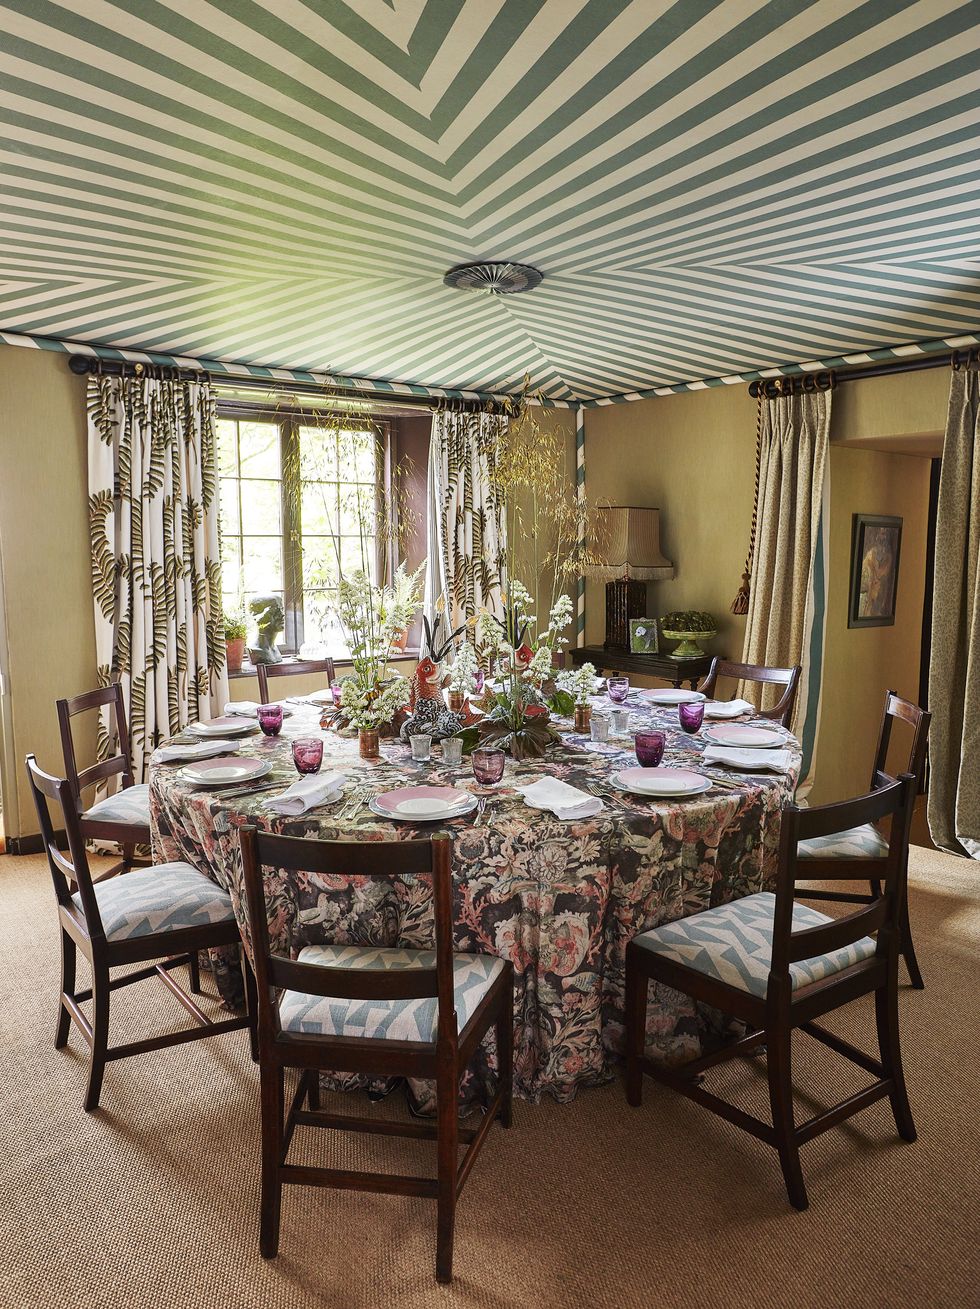 the illusion of a tented ceiling in a dining room with a custom trompe l’oeil treatment complete with candy striped trim and corner poles